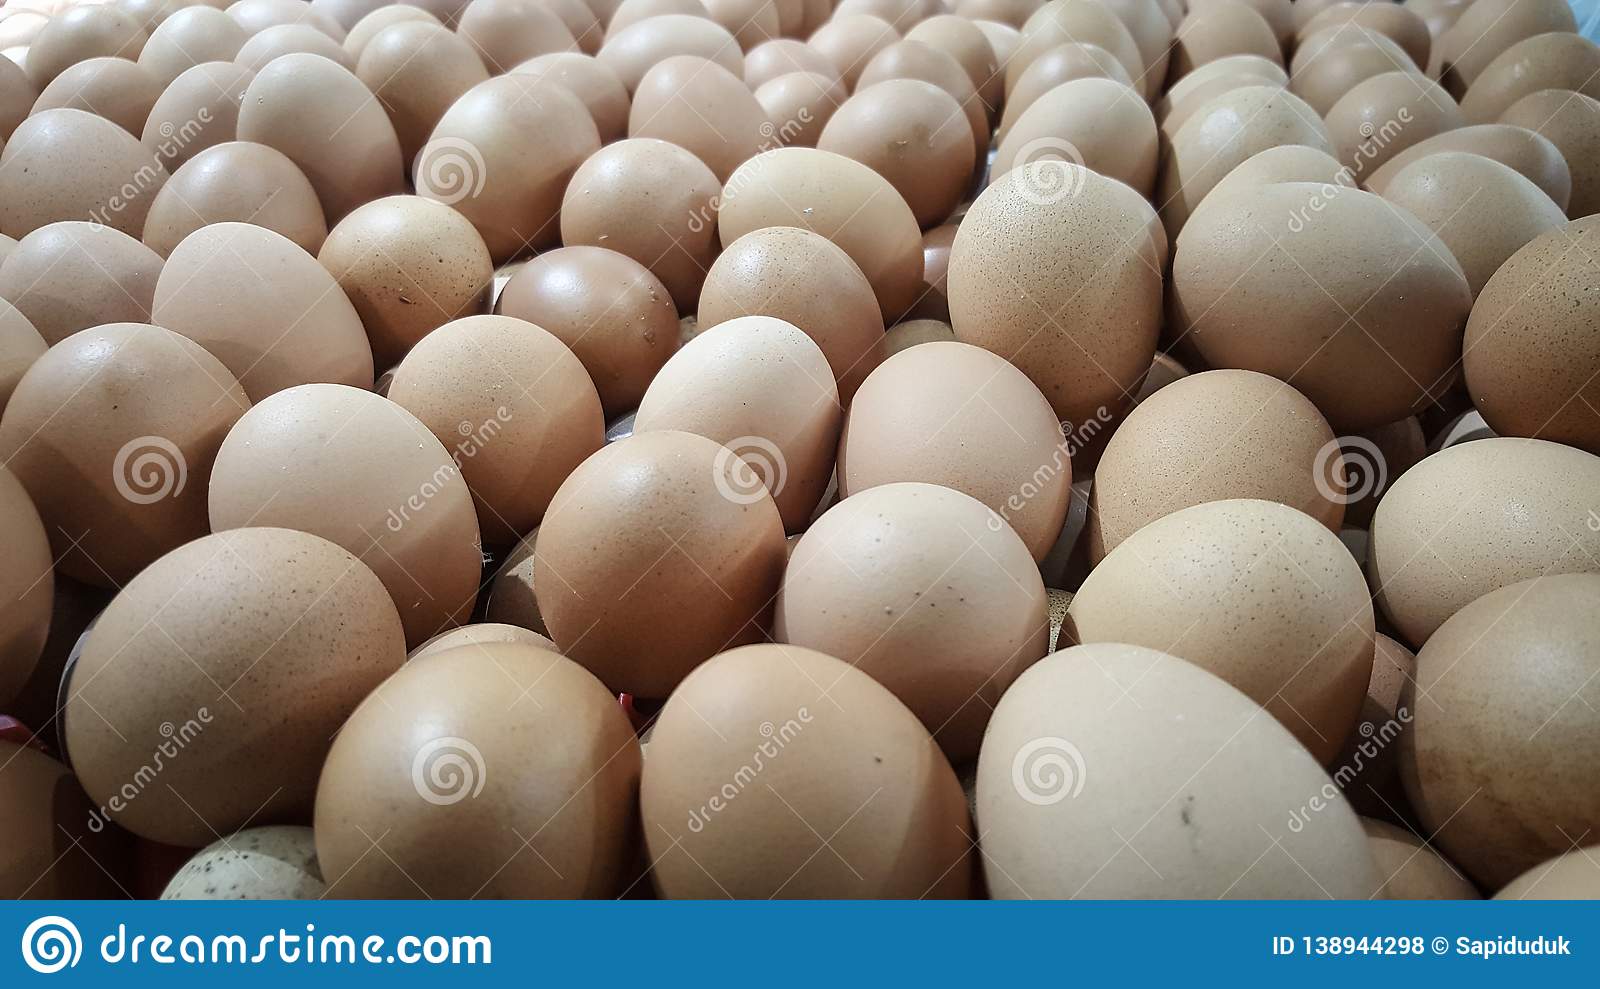 Does 7/11 sell fresh eggs? - Foodly